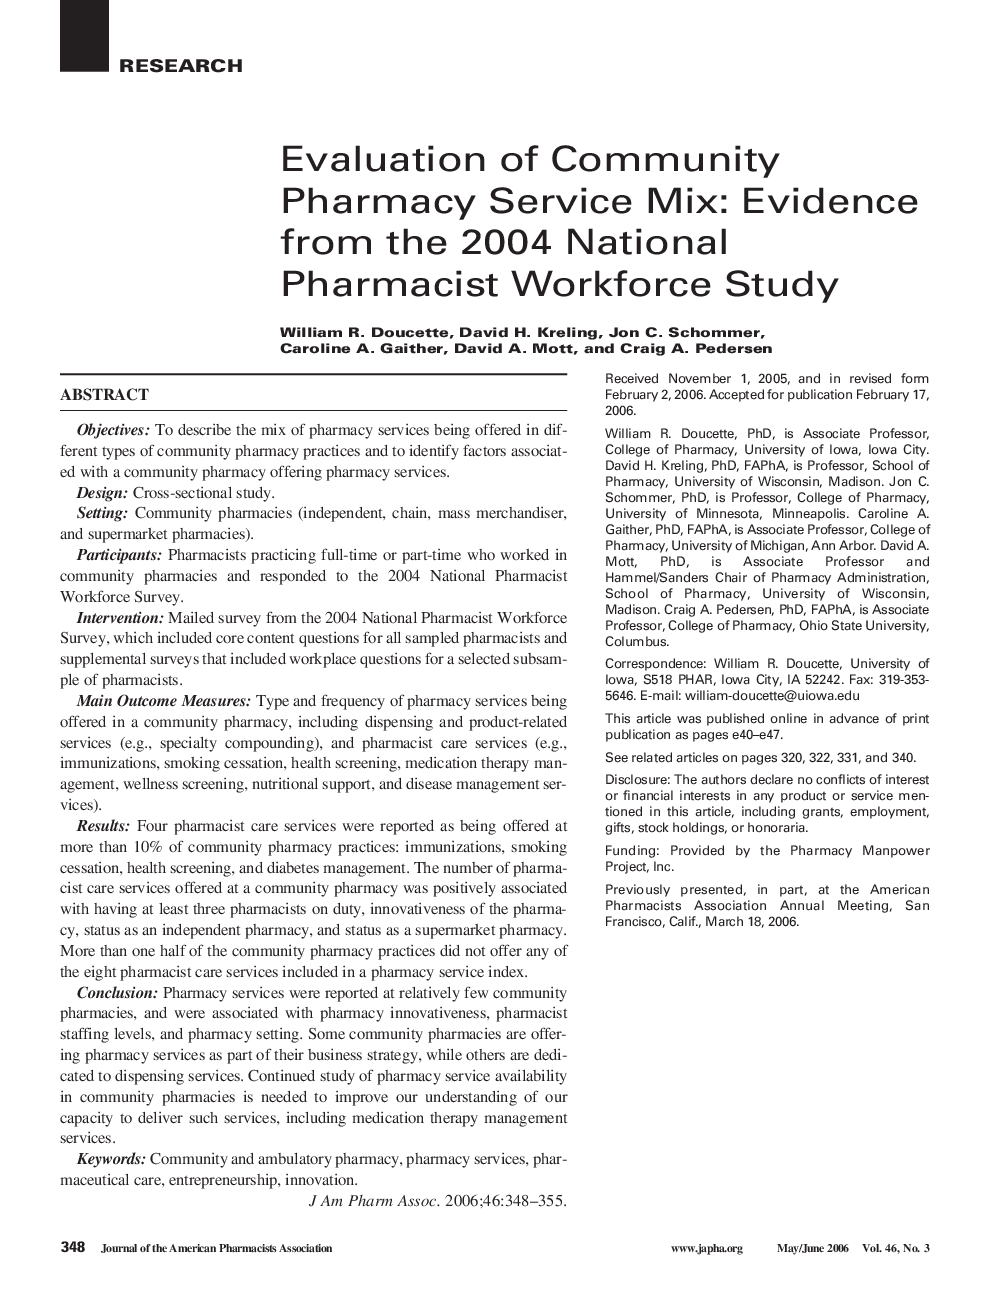 Evaluation of Community Pharmacy Service Mix: Evidence from the 2004 National Pharmacist Workforce Study